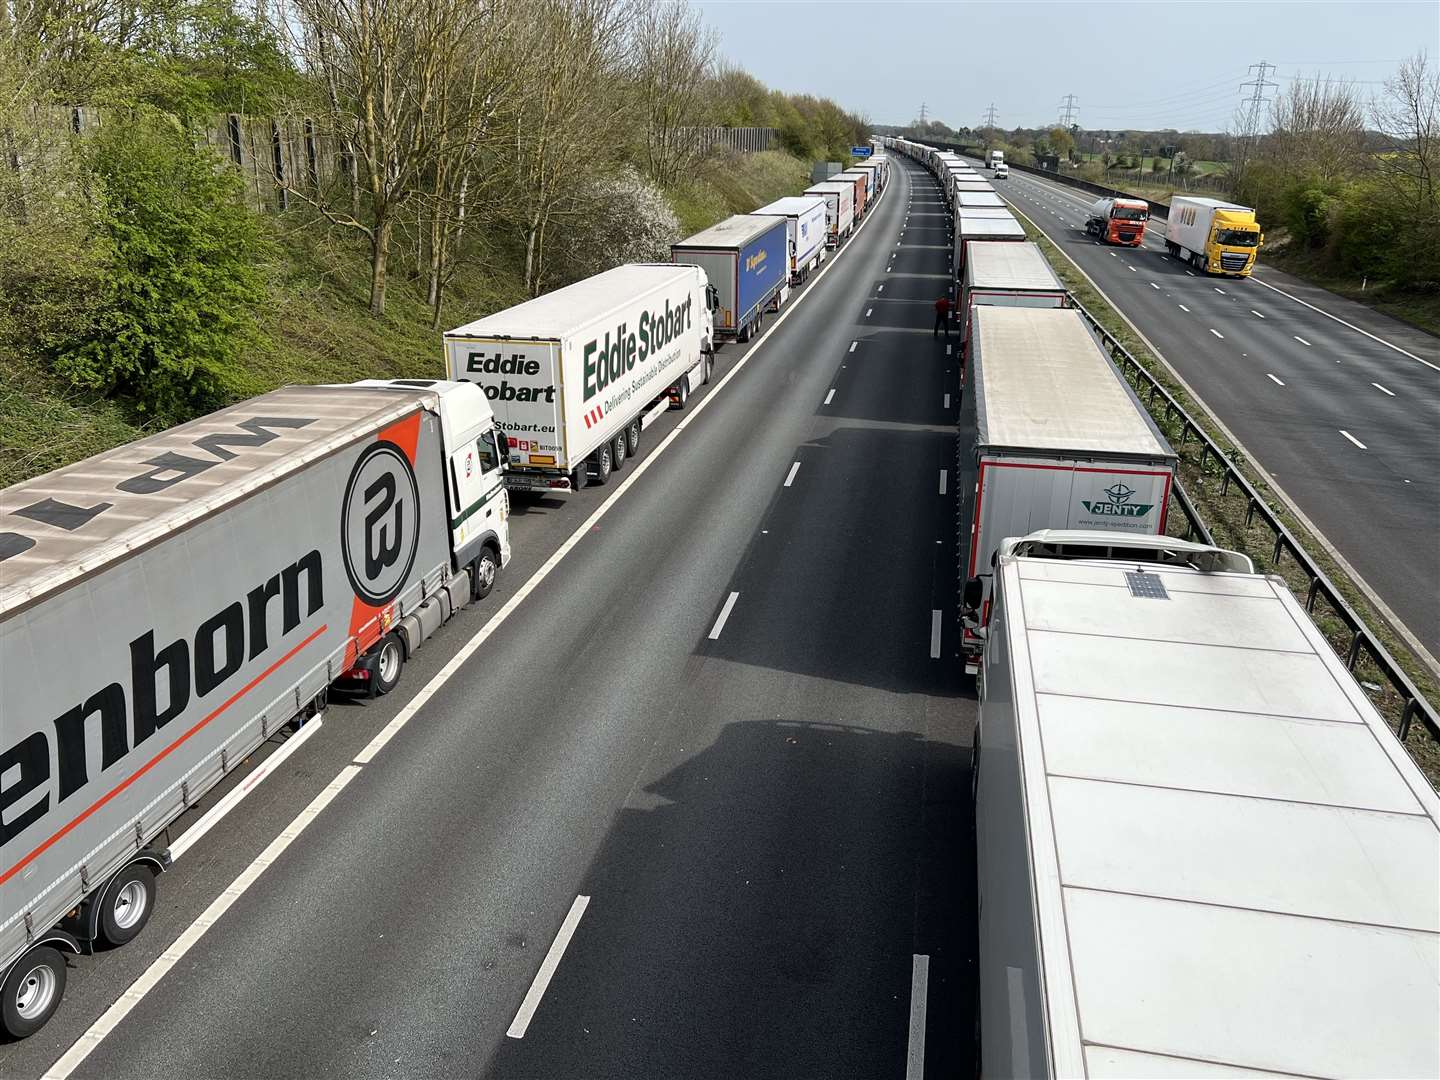 Lorries queue on the M20 motorway near Sellindge, as part of Operation Brock. Picture: Barry Goodwin